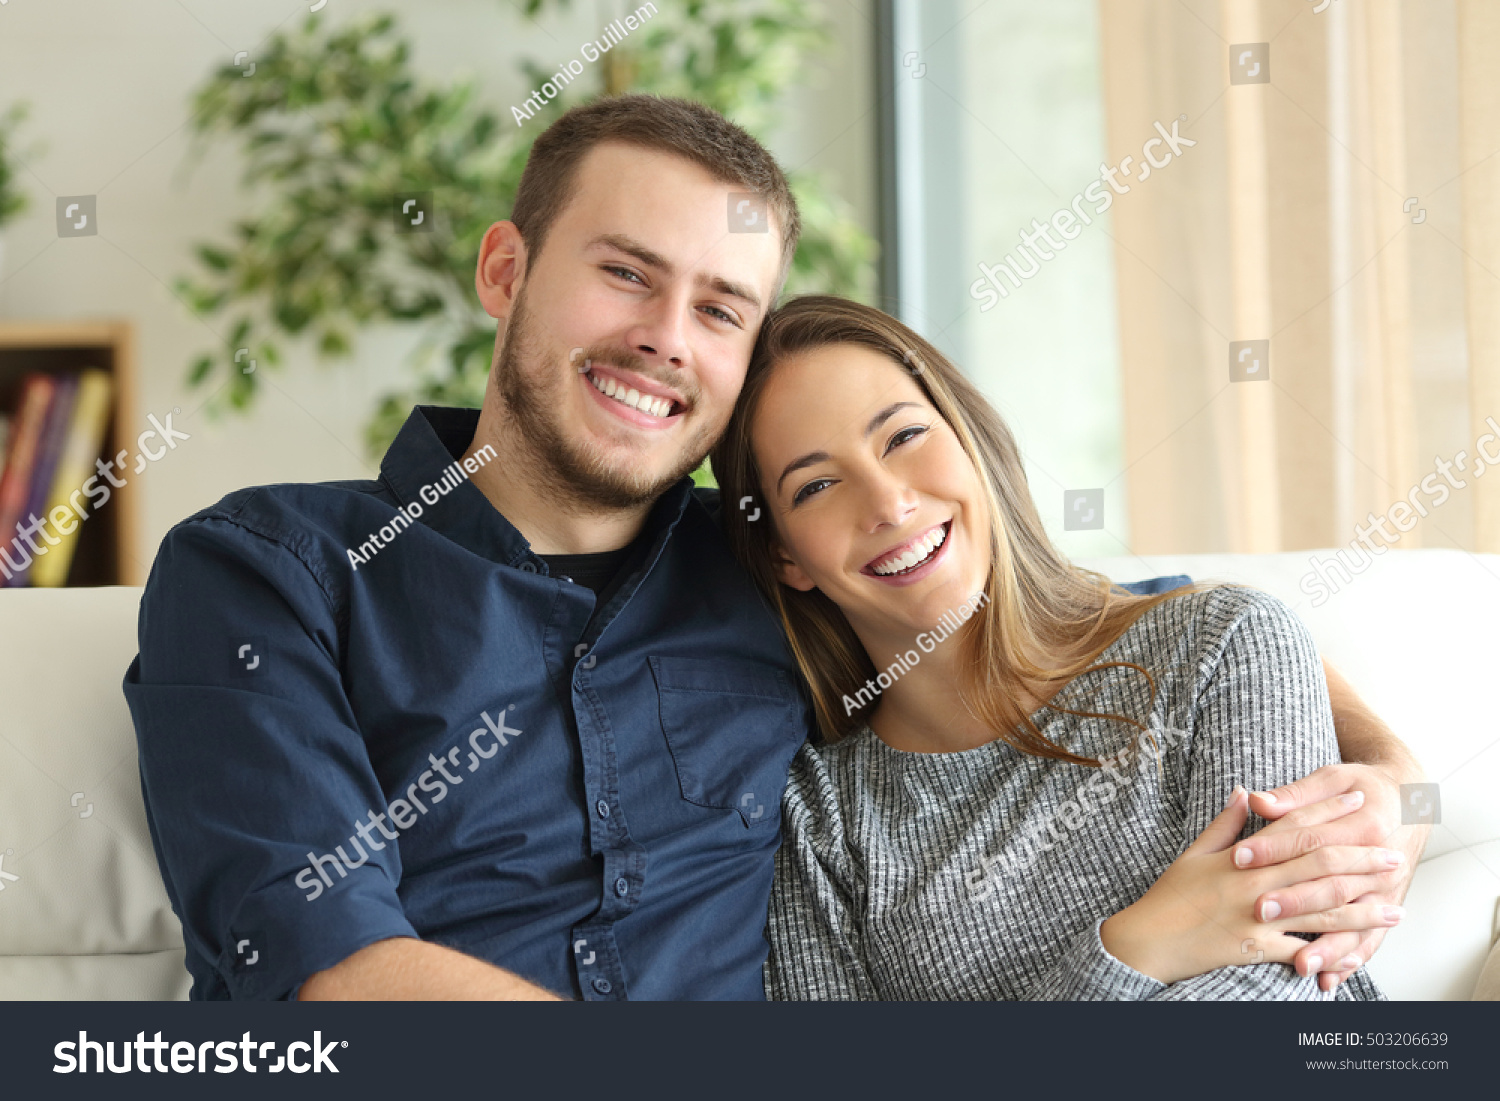 Front view portrait of a happy couple posing and looking at camera sitting on a couch in the living room at home #503206639